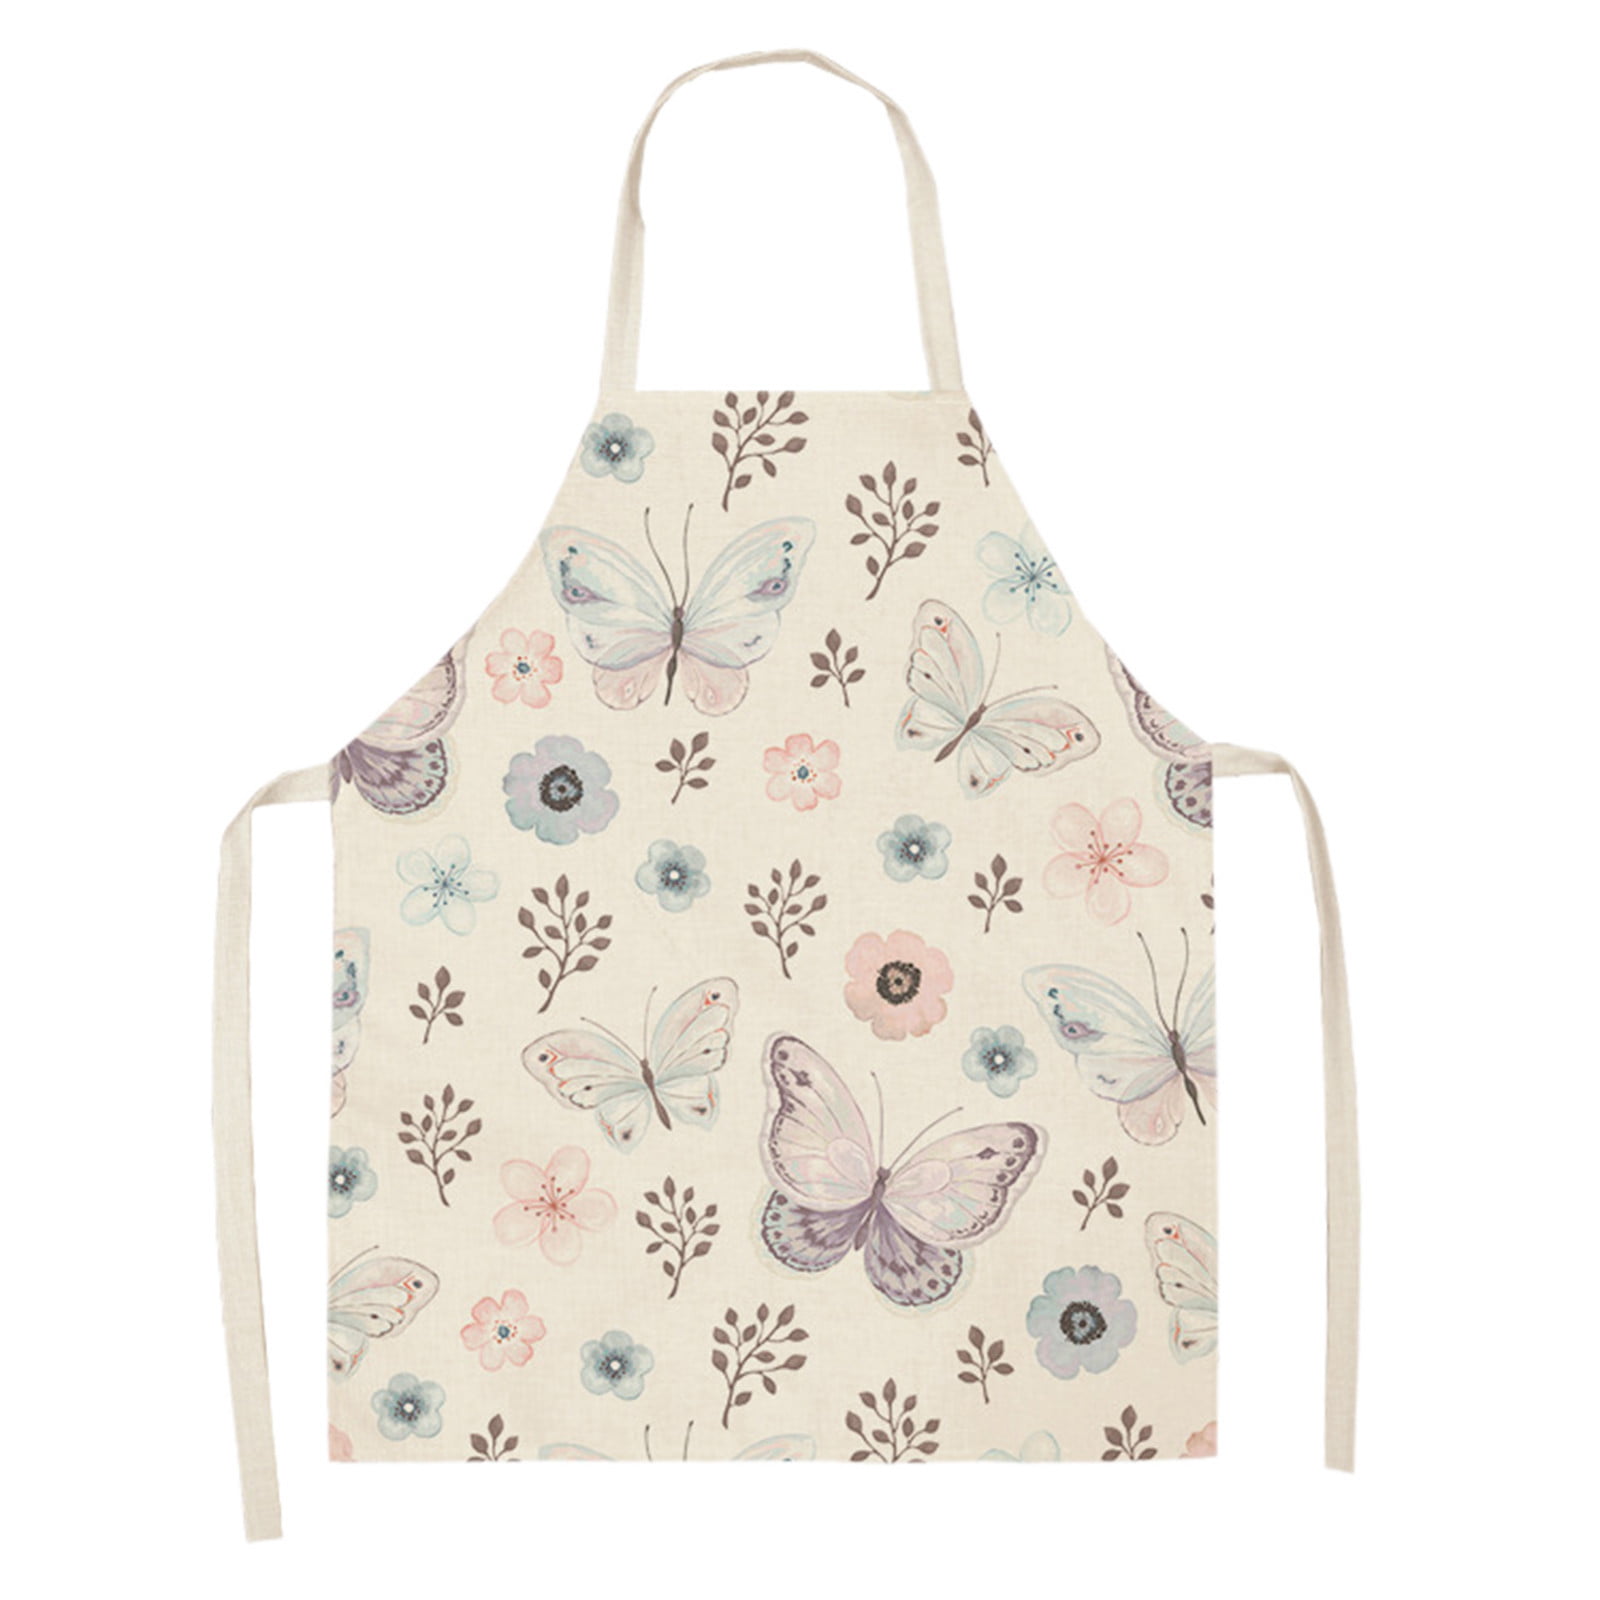 Cute Butterfly Printed Apron Cotton Linen Kitchen Cooking Women Cleaning Aprons 